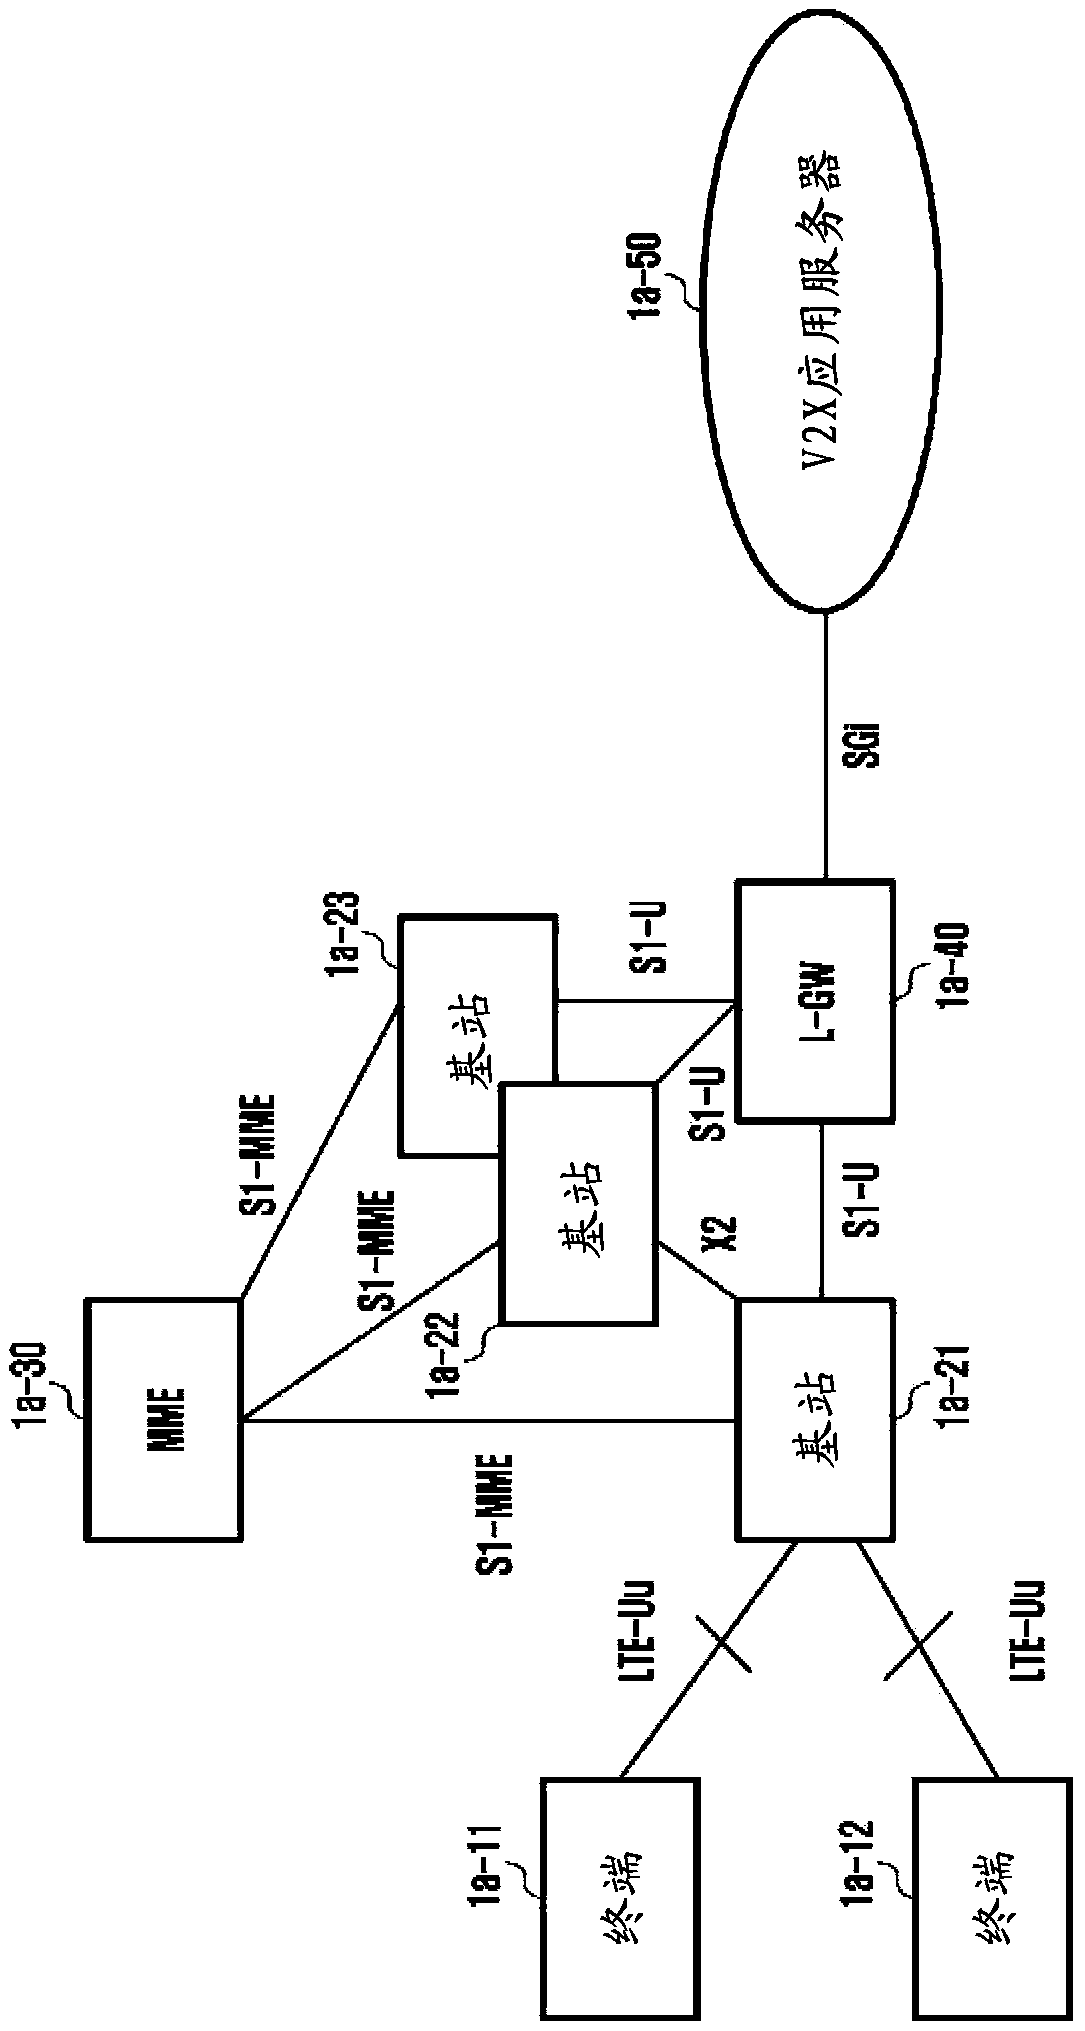 Method and apparatus for specified attach procedure and mobility and paging support in data communication network